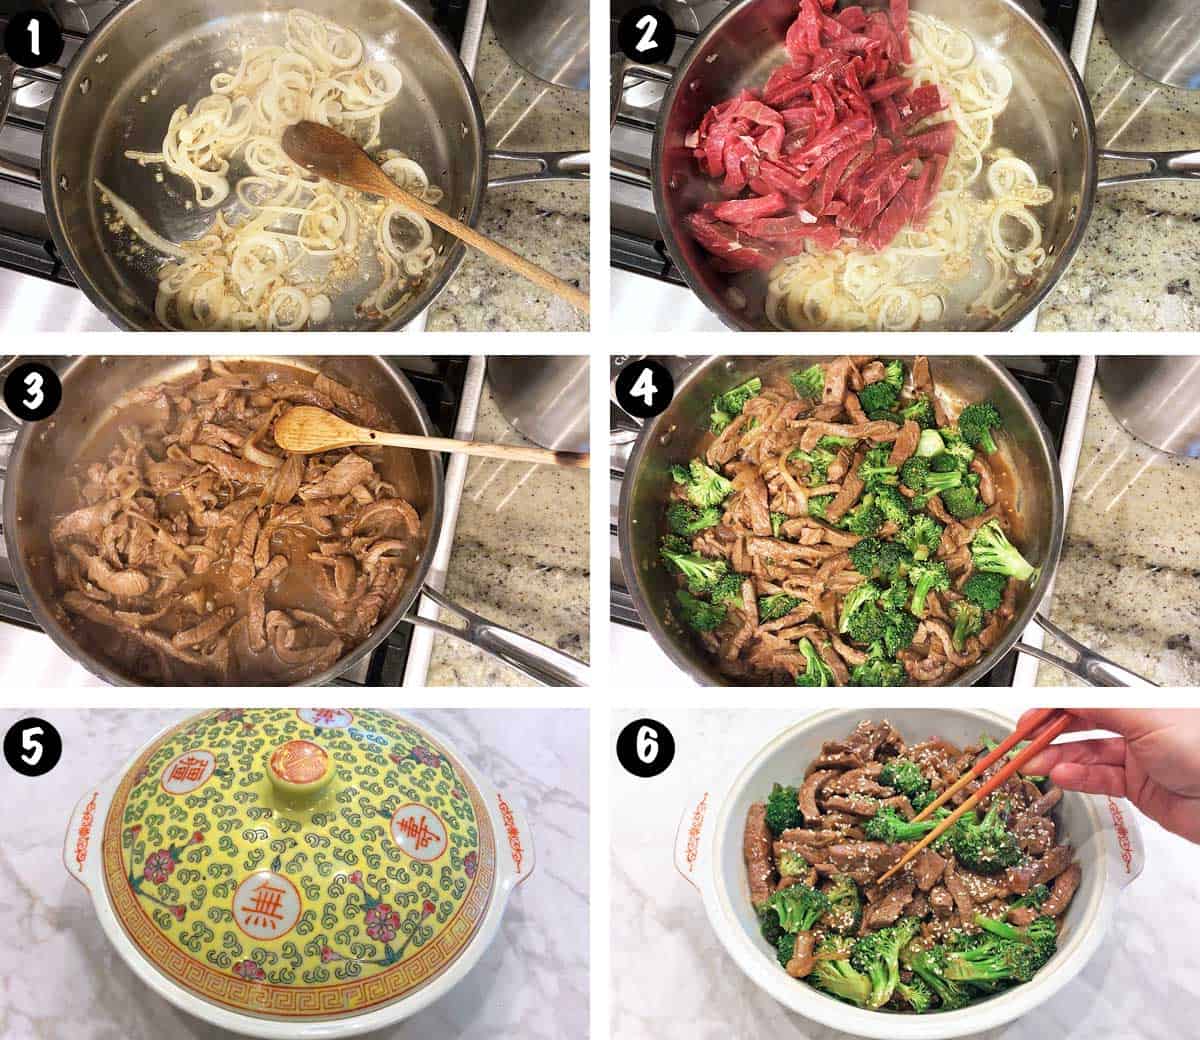 A photo collage showing the steps for making homemade beef and broccoli. 